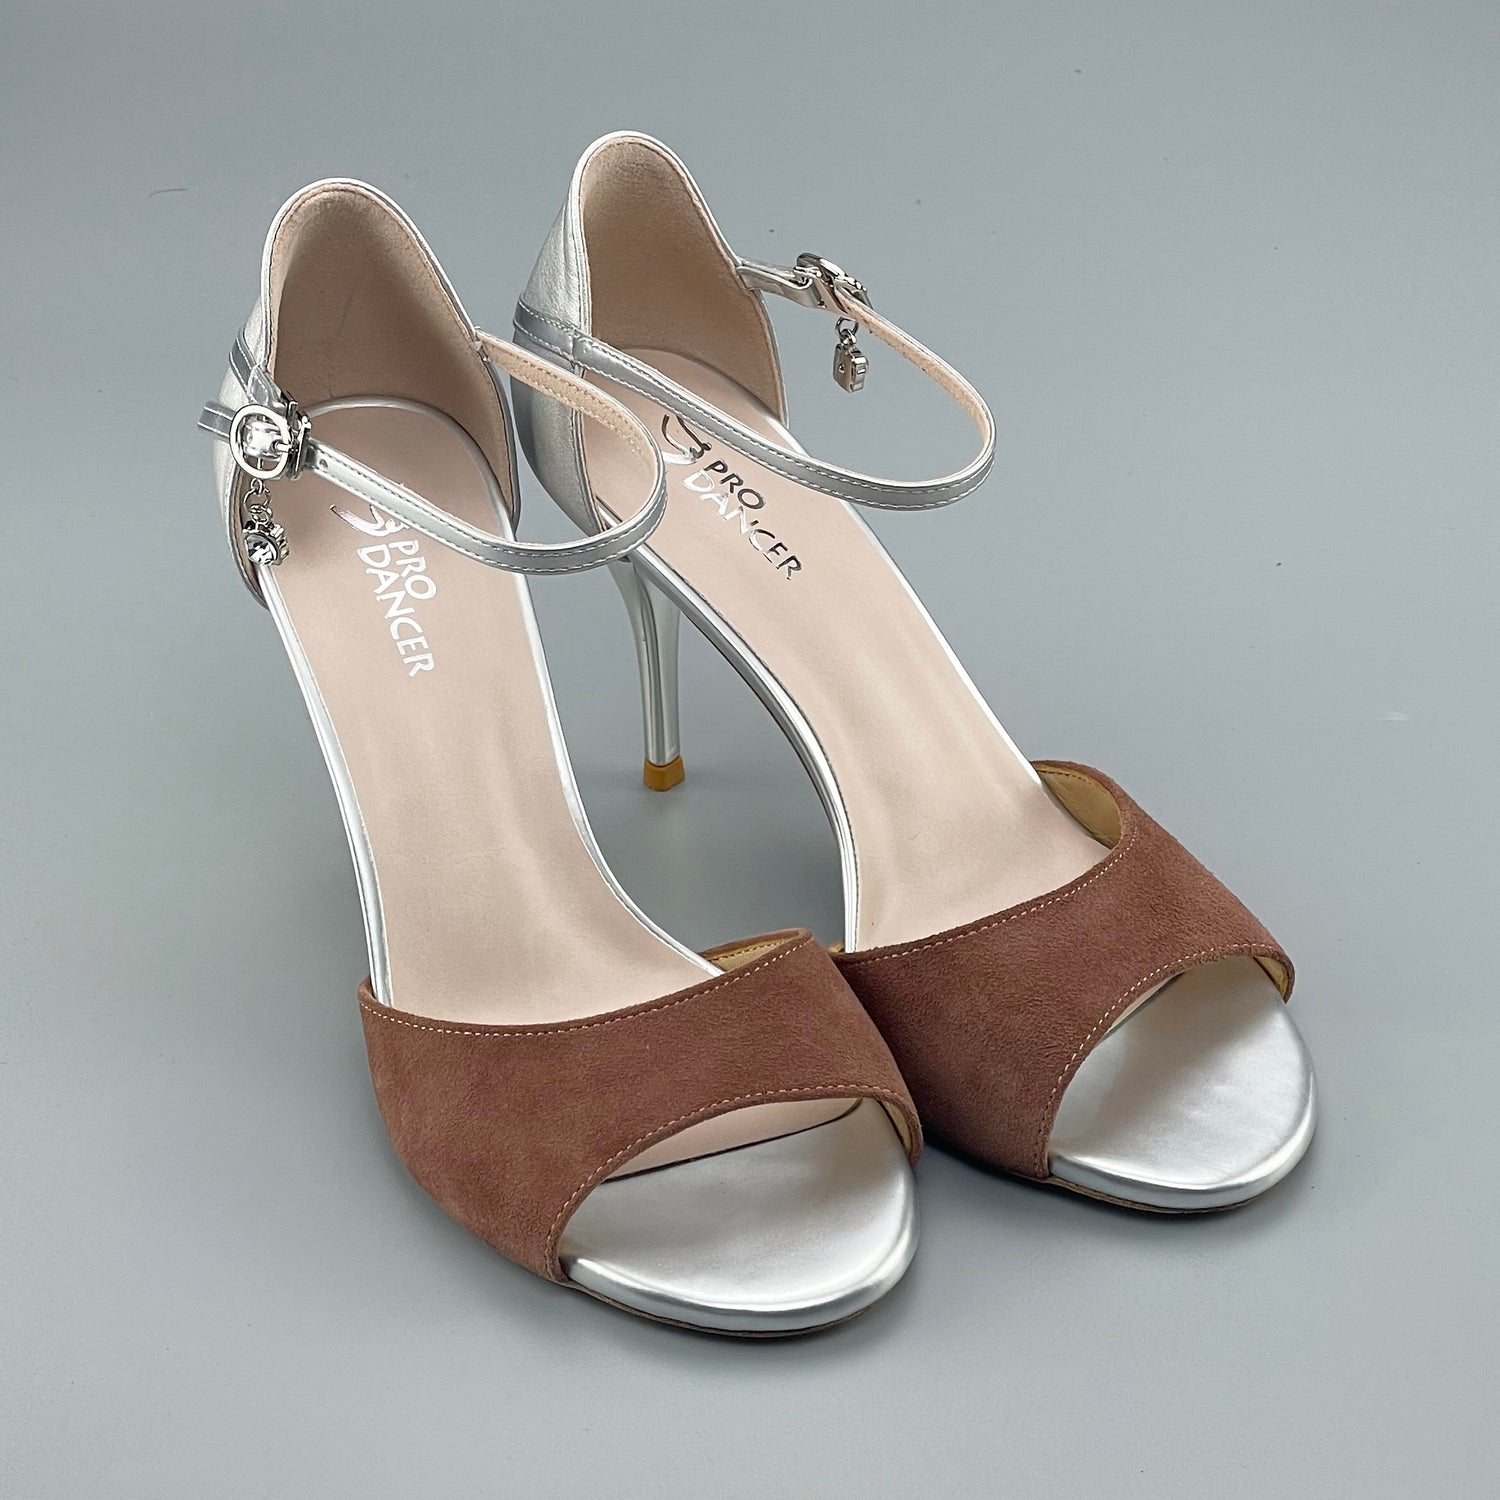 Pro Dancer open-toe Argentine Tango shoes with closed-back, high heels, hard leather sole in brown and silver (PD-9042E)0